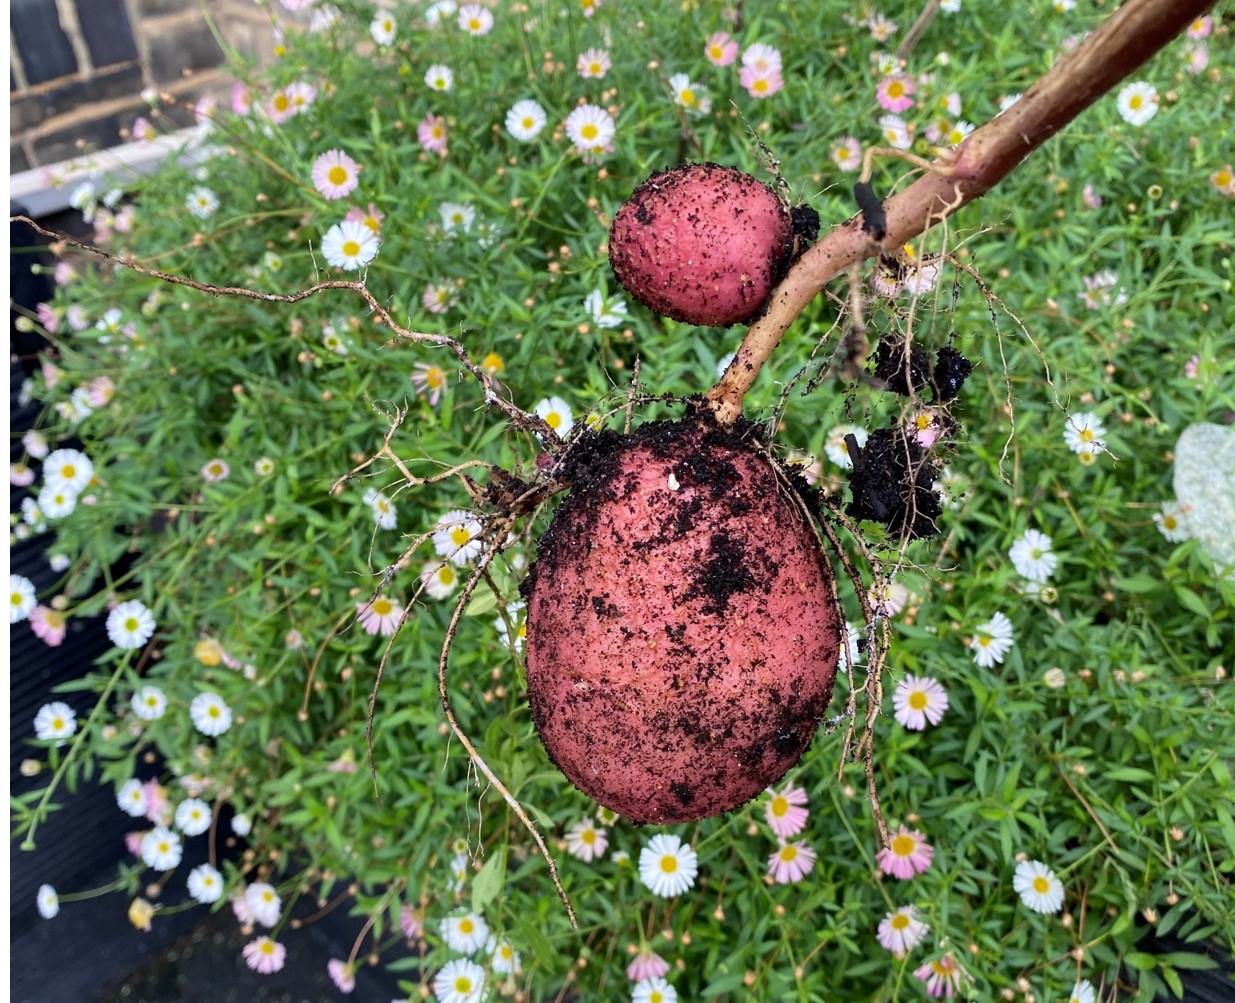 Image: A muddy potato from gardening club in-front of a flowering green plant